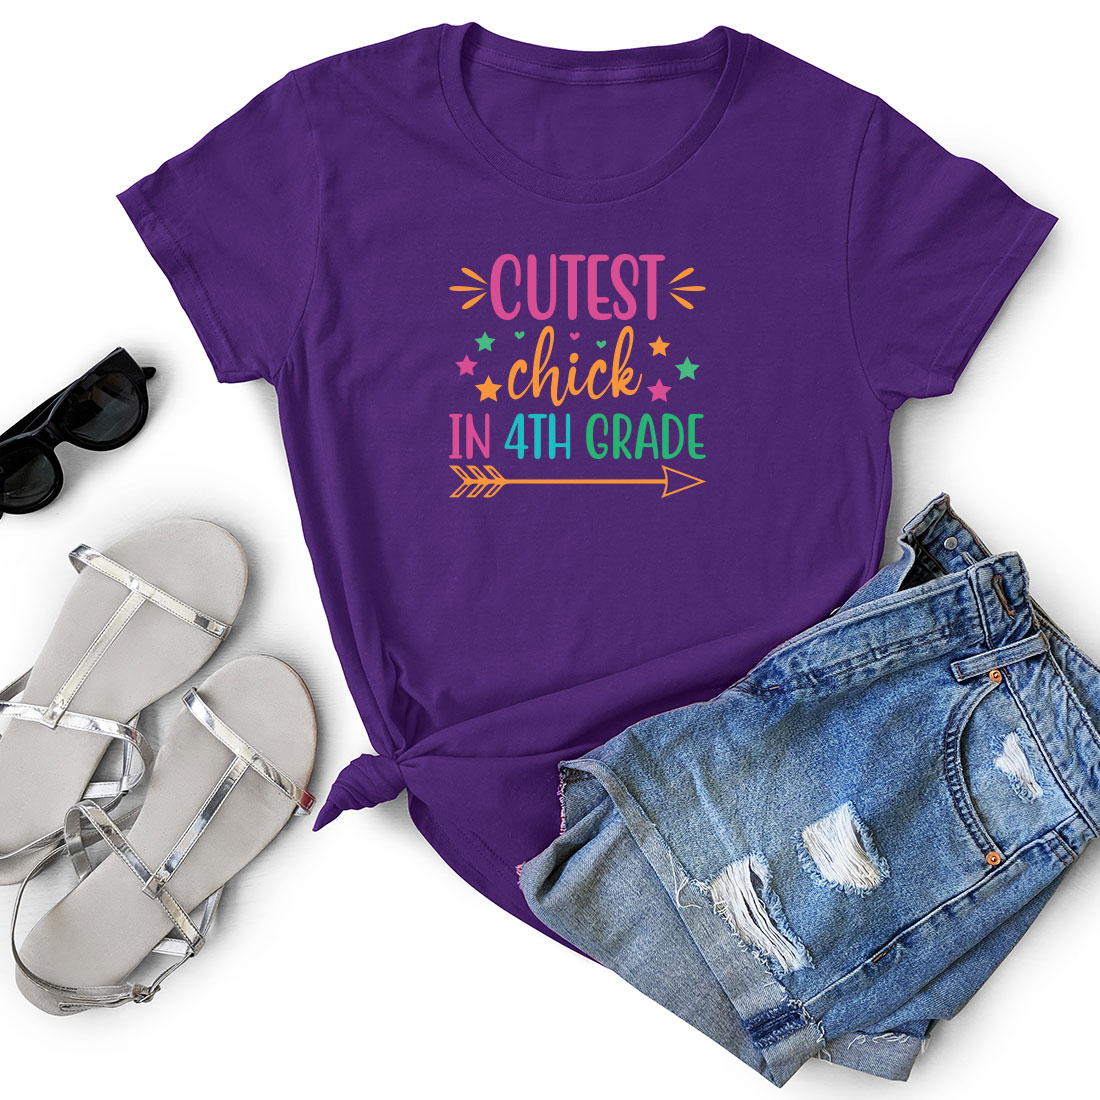 Purple shirt that says cutest chick in 4th grade next to a pair of.